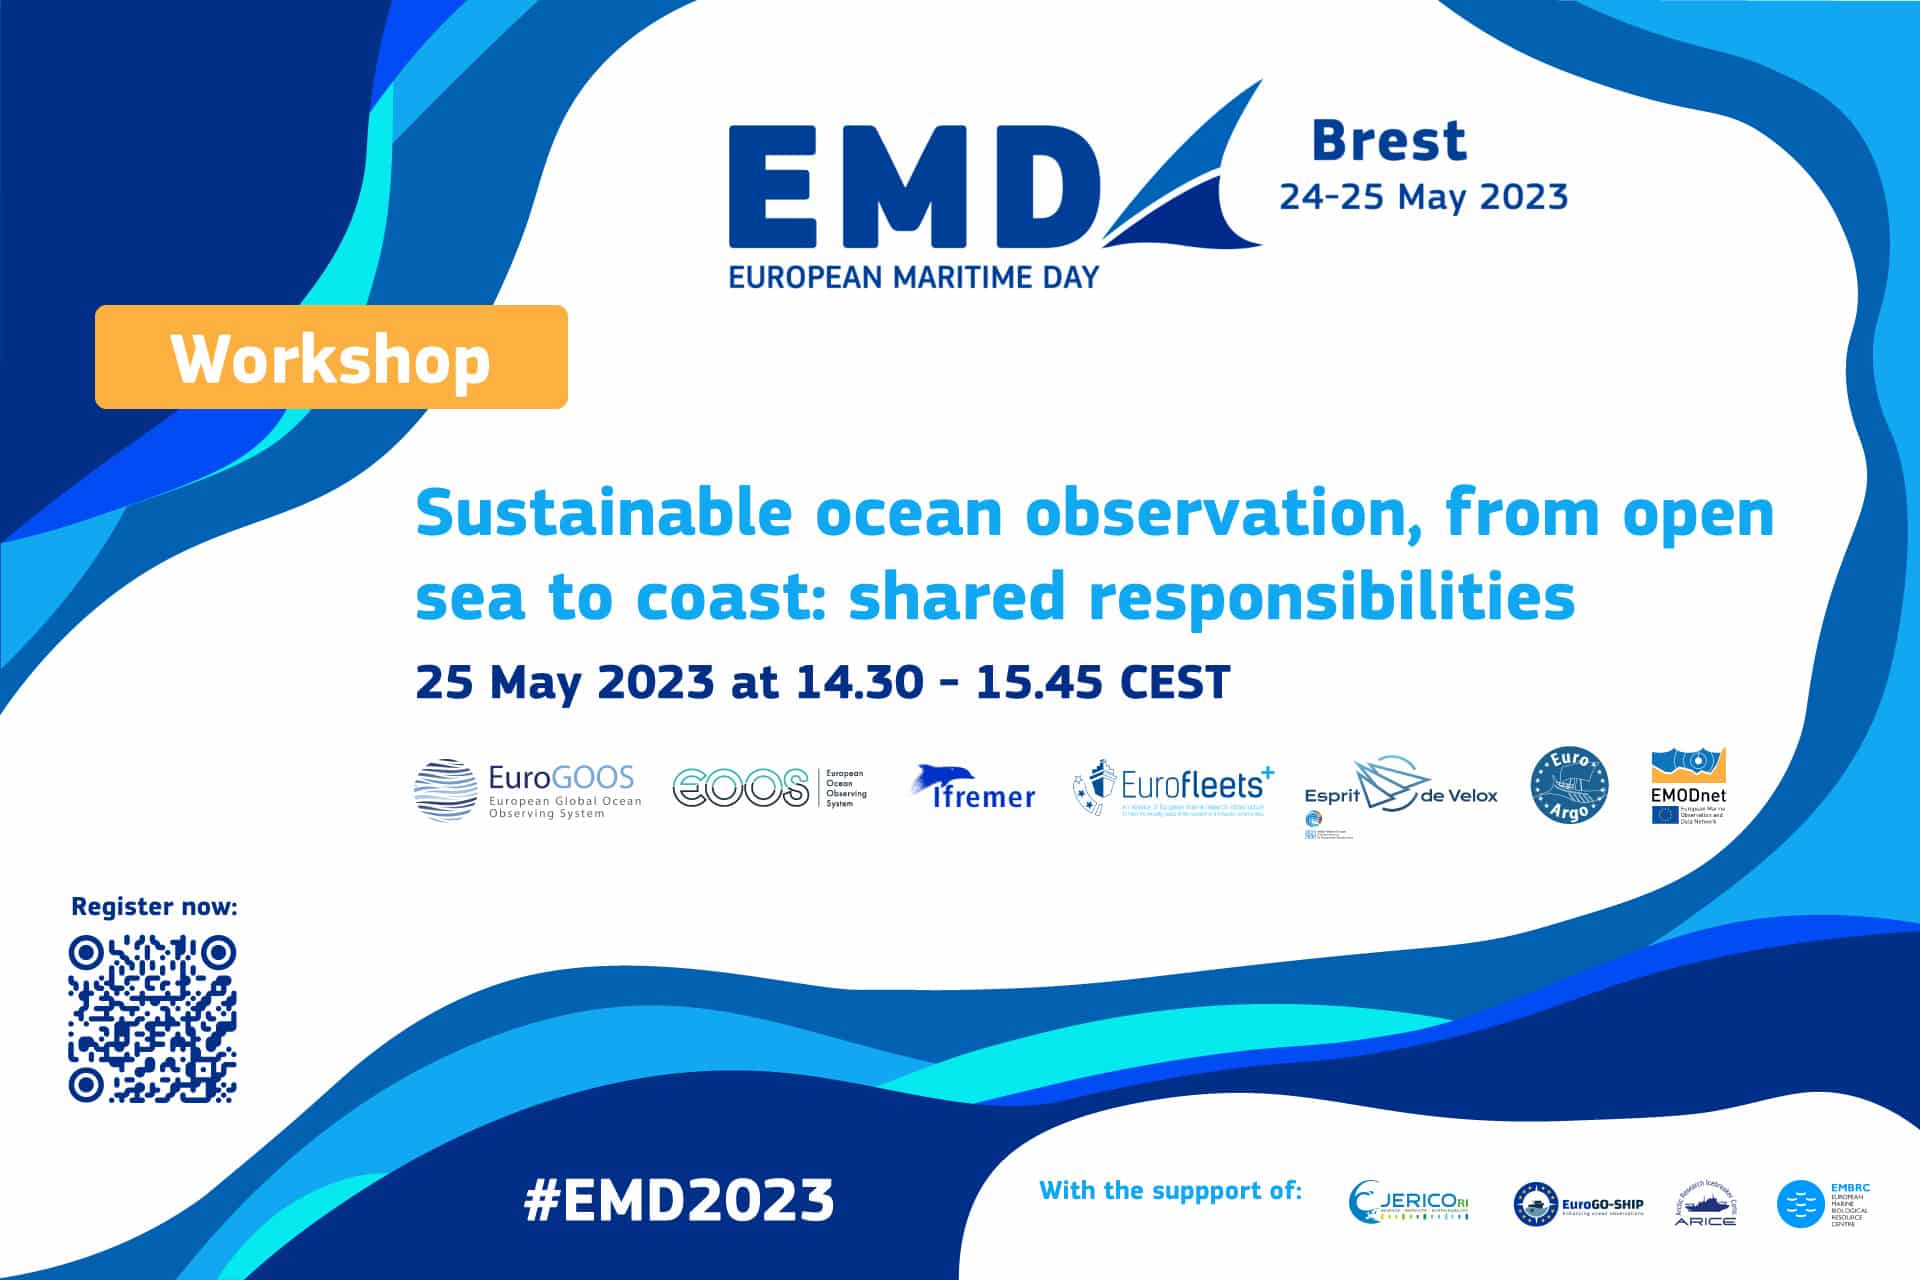 European Maritime Day will in Brest-France 24-25 May